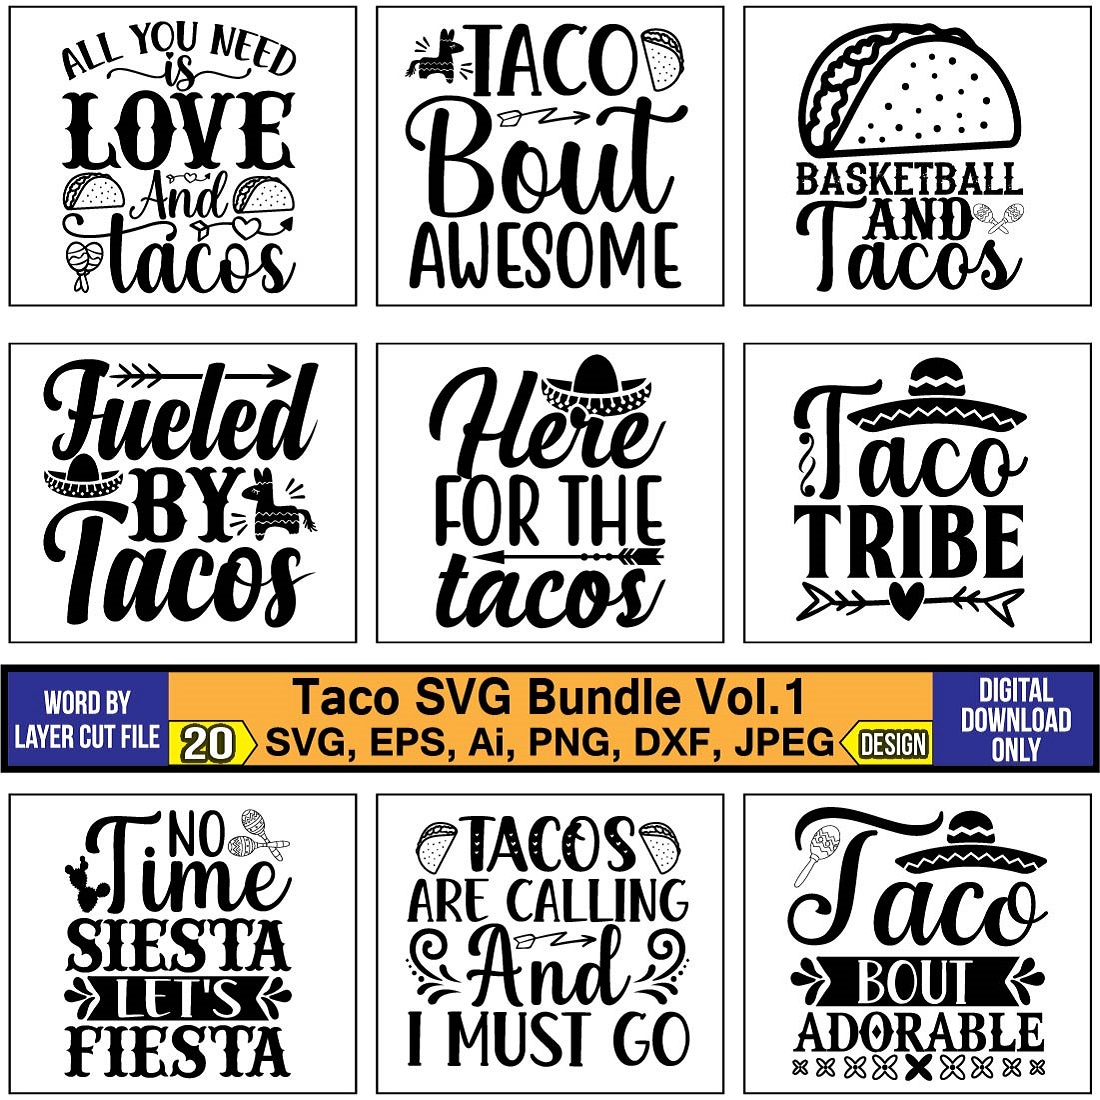 A pack of wonderful images for prints on the theme of tacos.